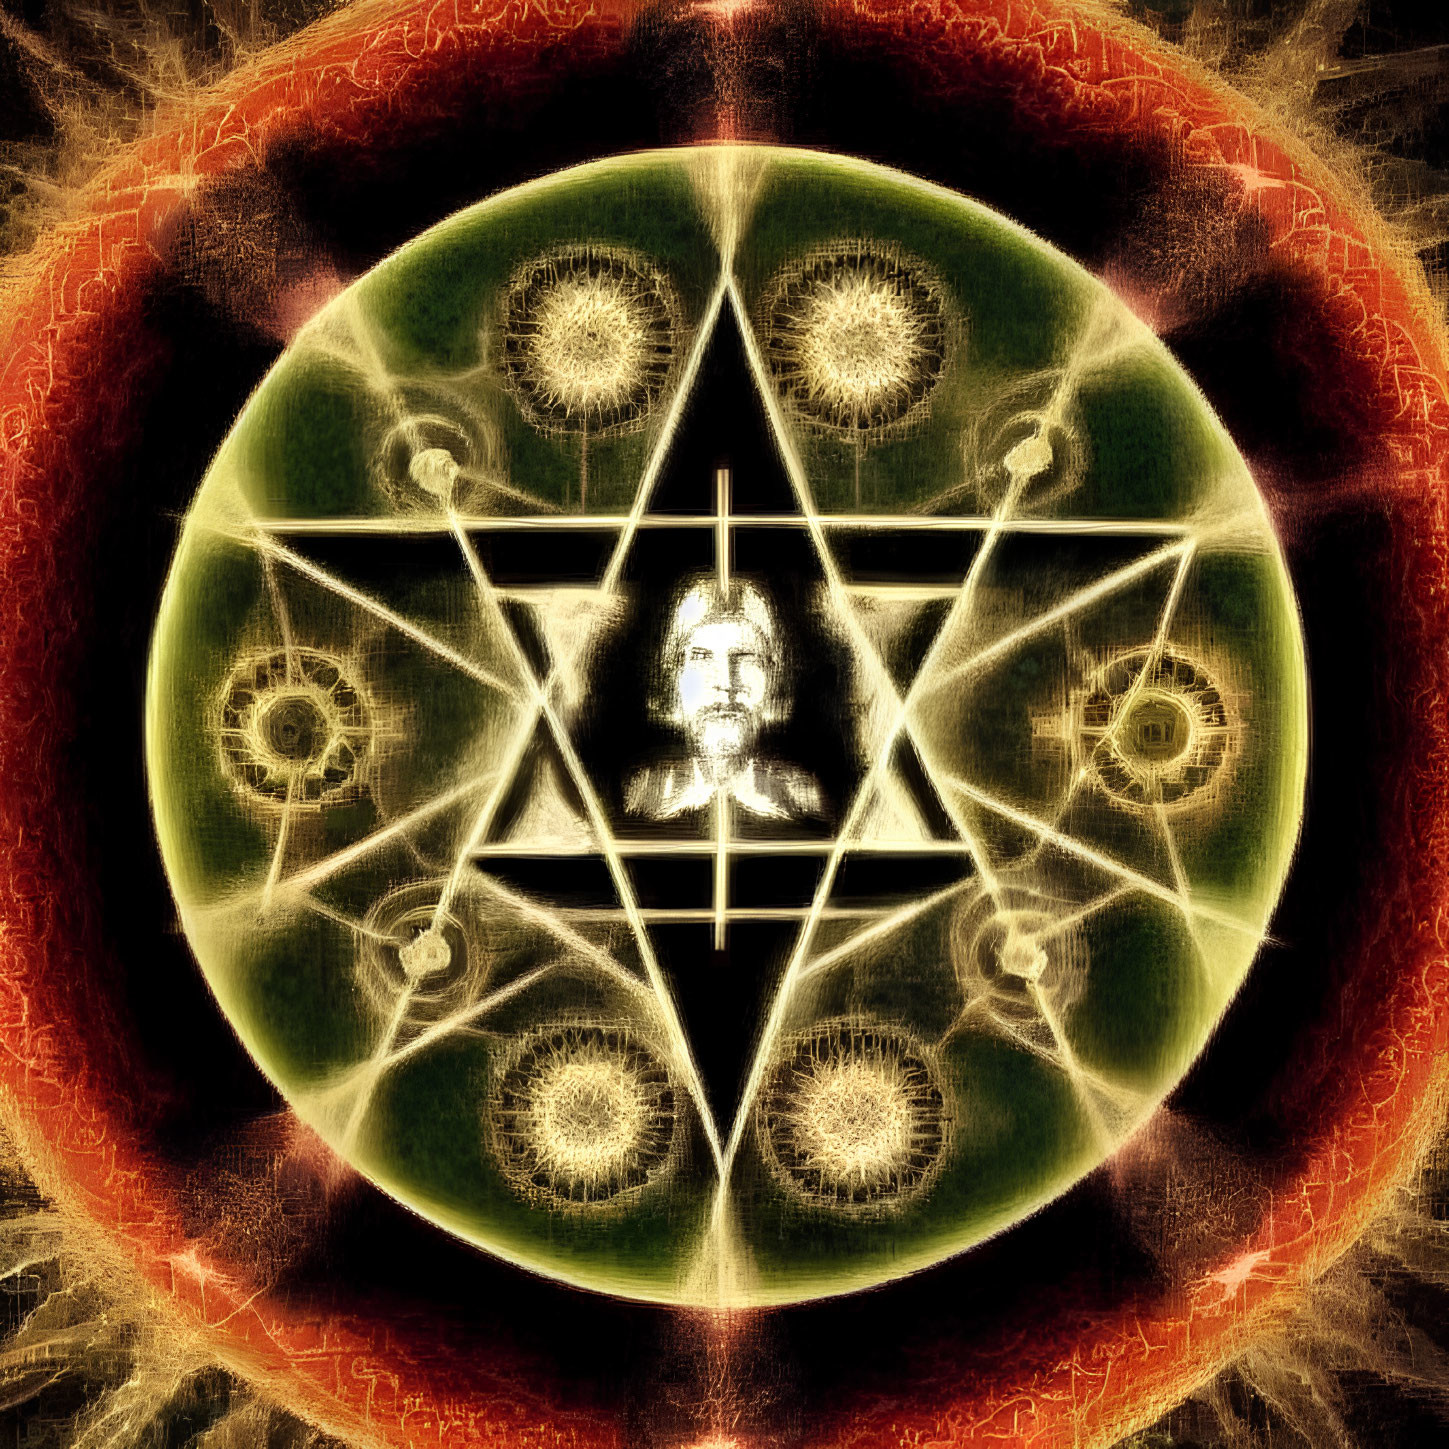 Geometric Pentagram Design with Human Face on Fiery Background